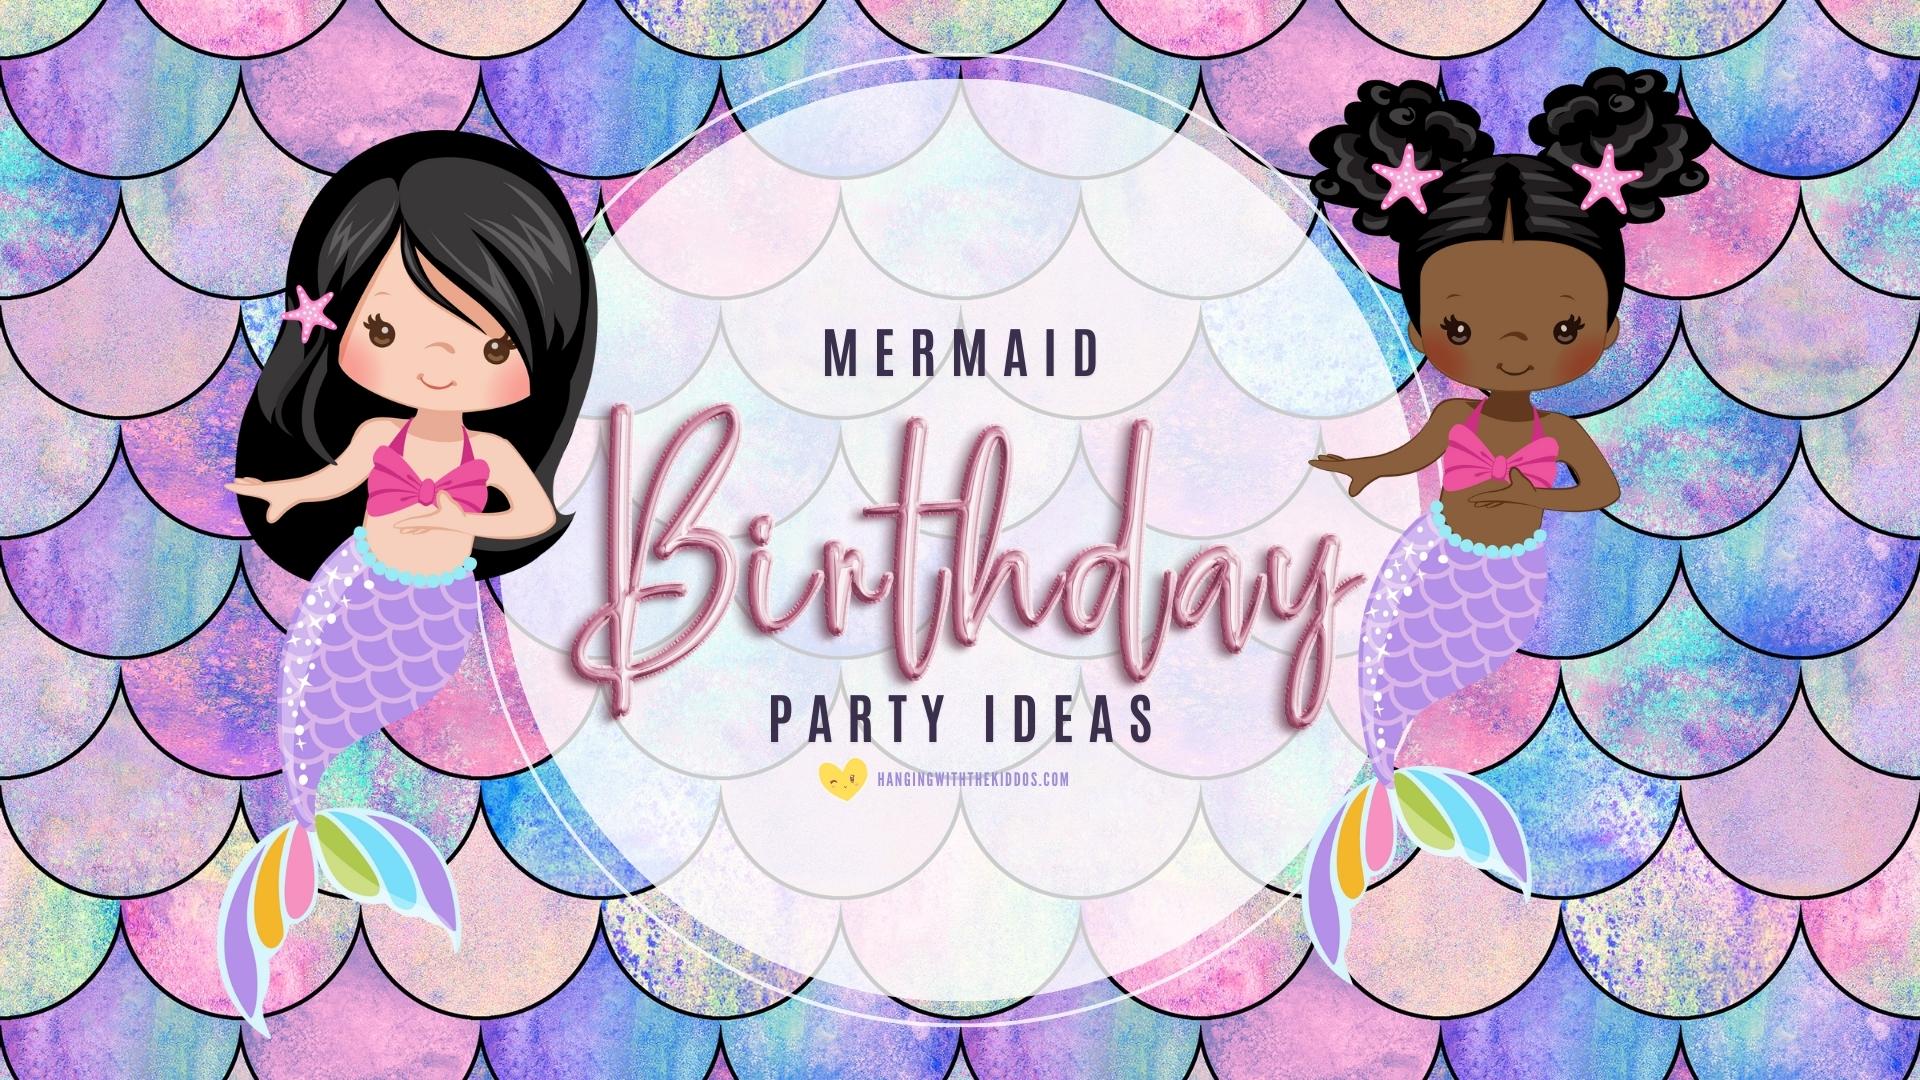 Mermaid Birthday Party Ideas: How to Throw the Perfect Under The Sea Bash -  Hanging with the Kiddos